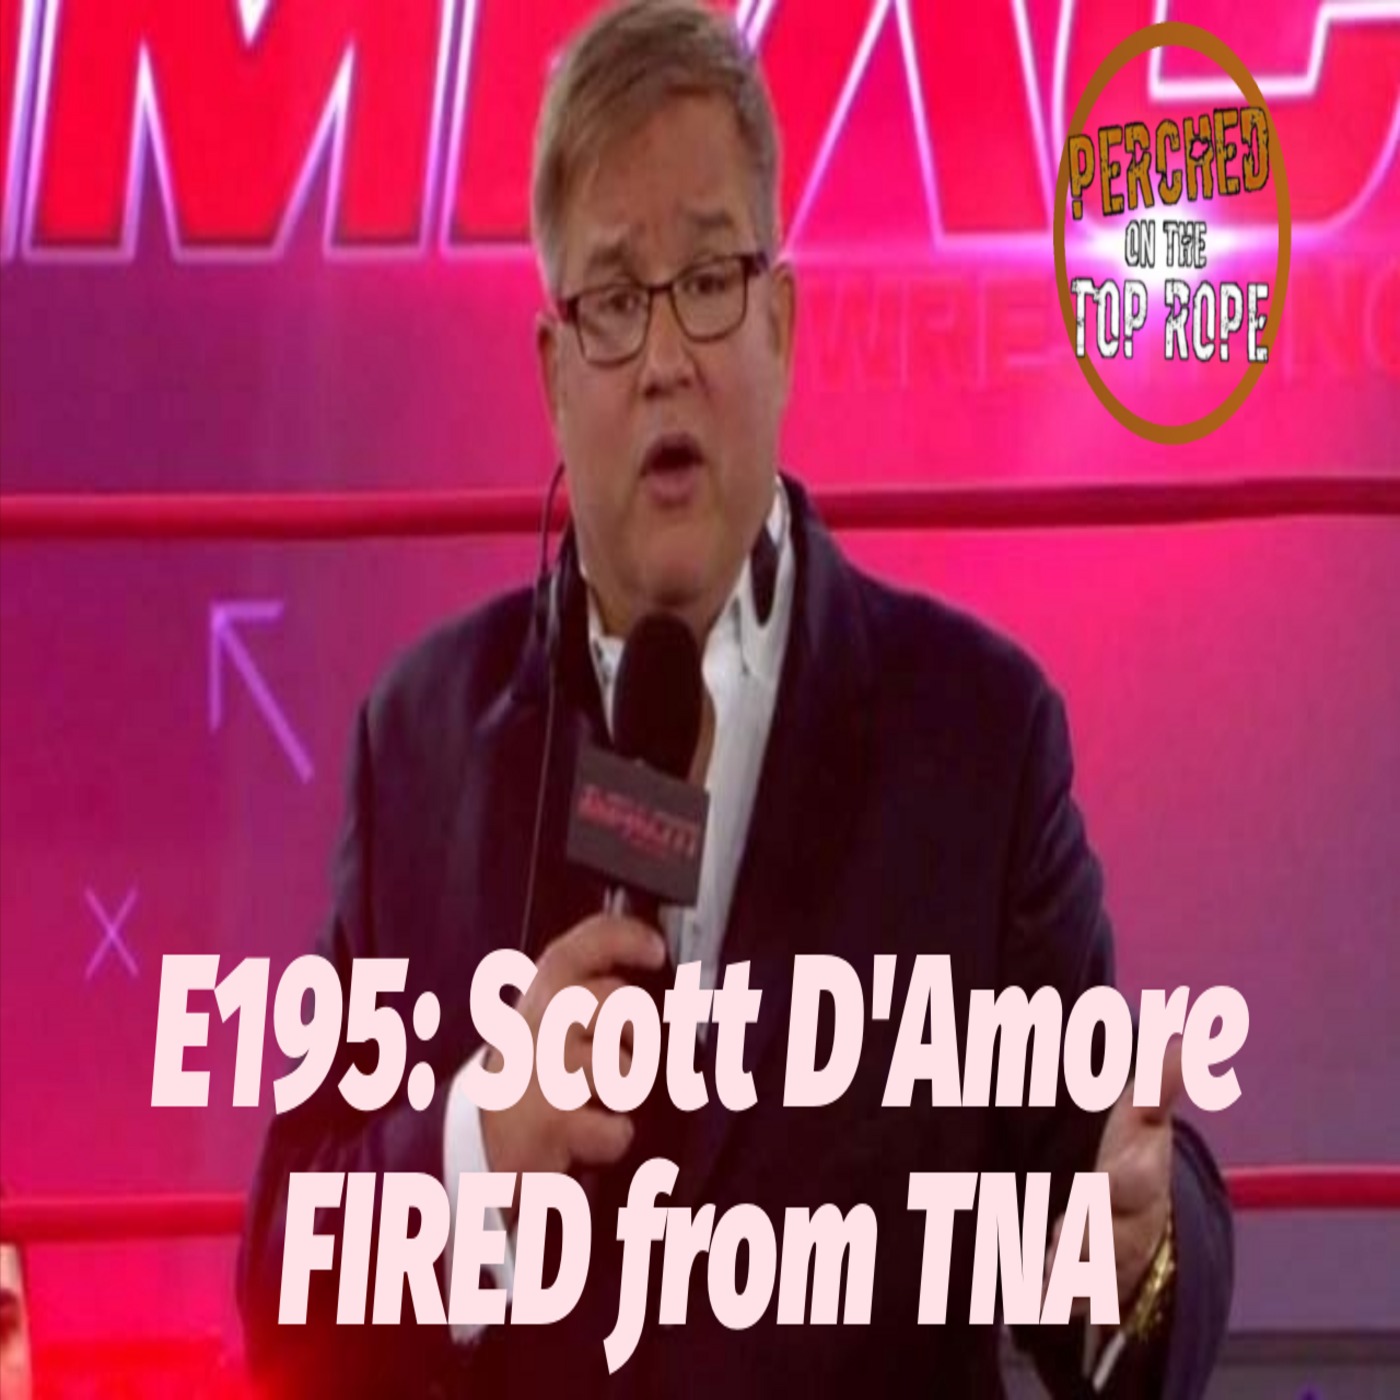 E195: TNA Fires President Scott D'Amore, New President Releases Statement, Latest contract new on NXT Dijak, WrestleMania Press Conference and More!